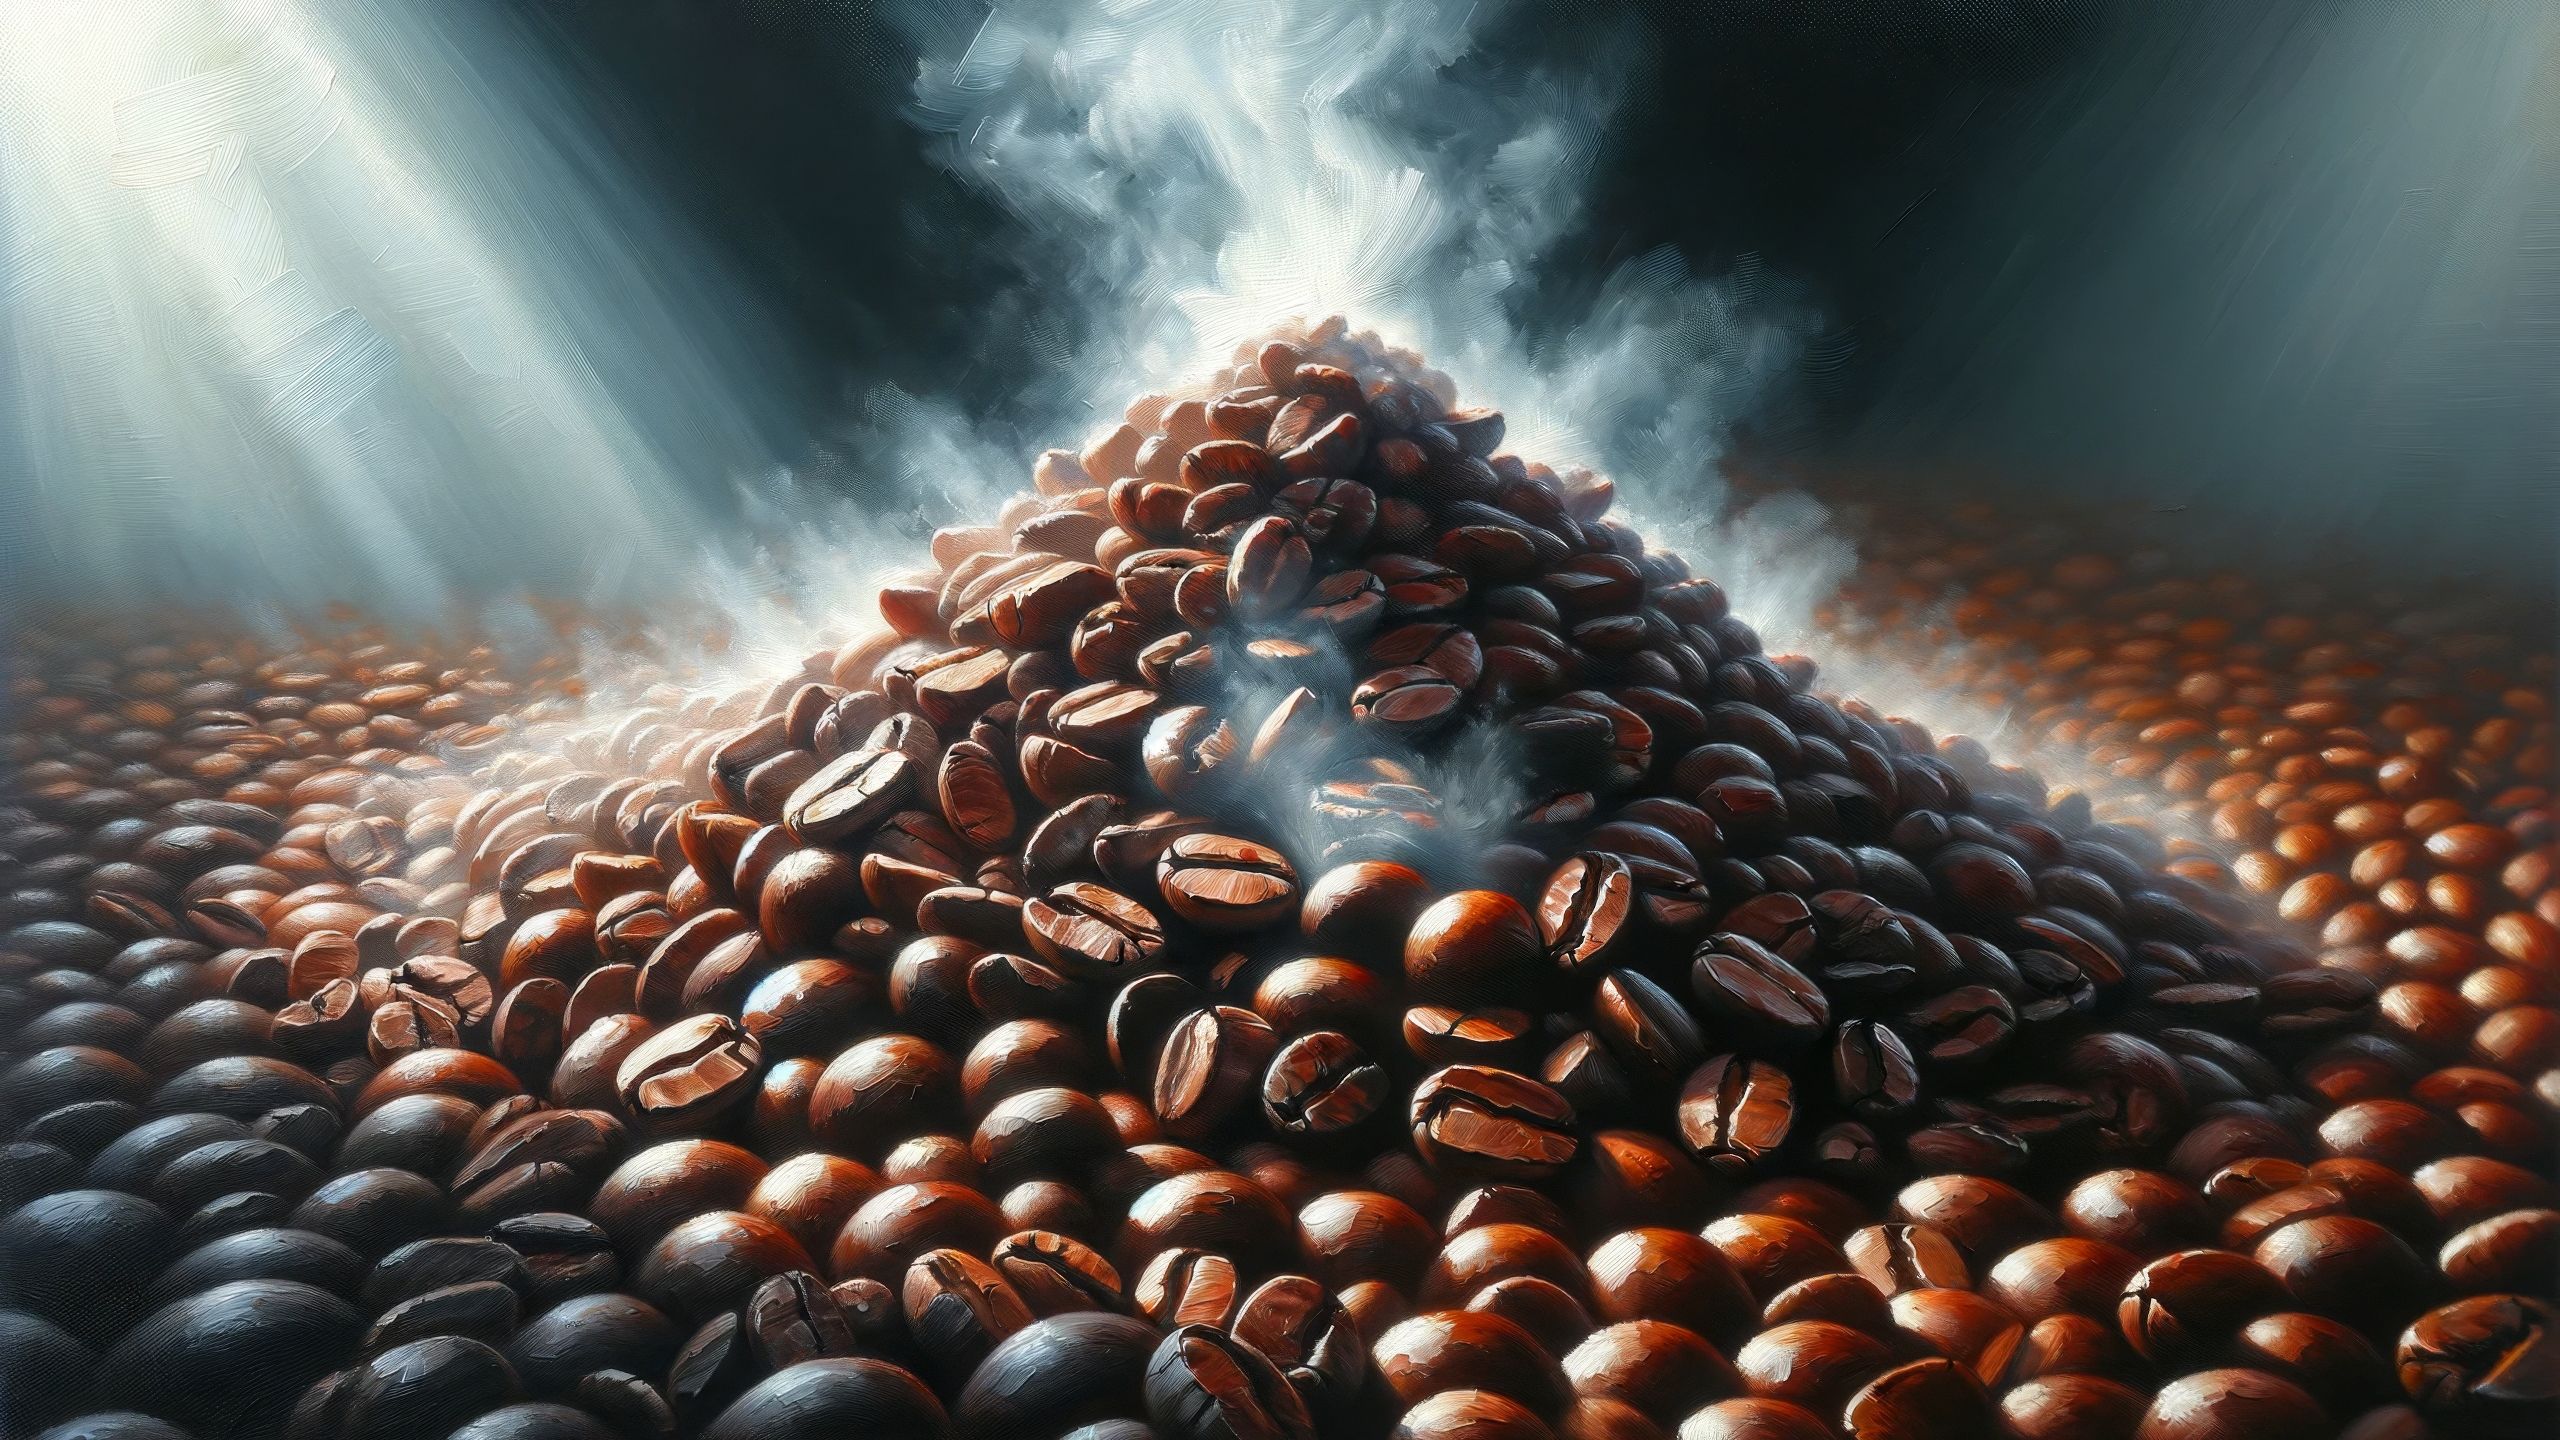 A close-up, modern, realistic painting depicting a mountain of roasted coffee beans, with steam gently rising from the pile, capturing the warmth and -topaz-standard v2-2560w.jpeg